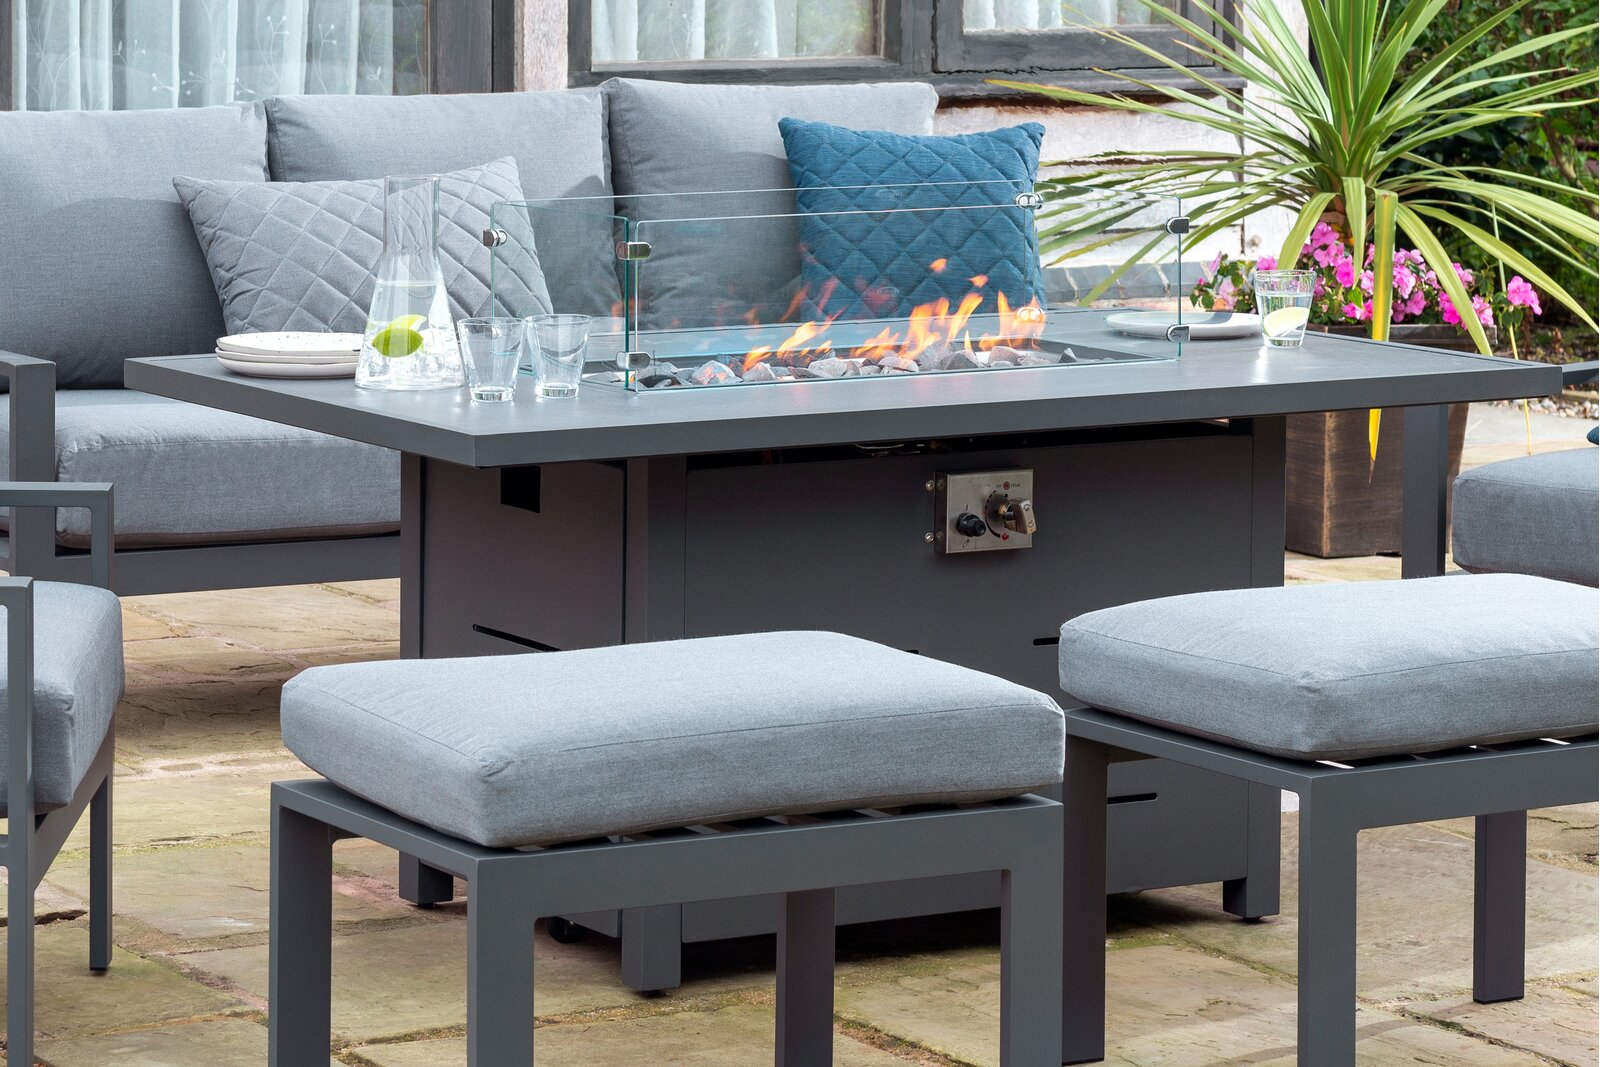 Outdoor fire pit table wicker propane fire pit table